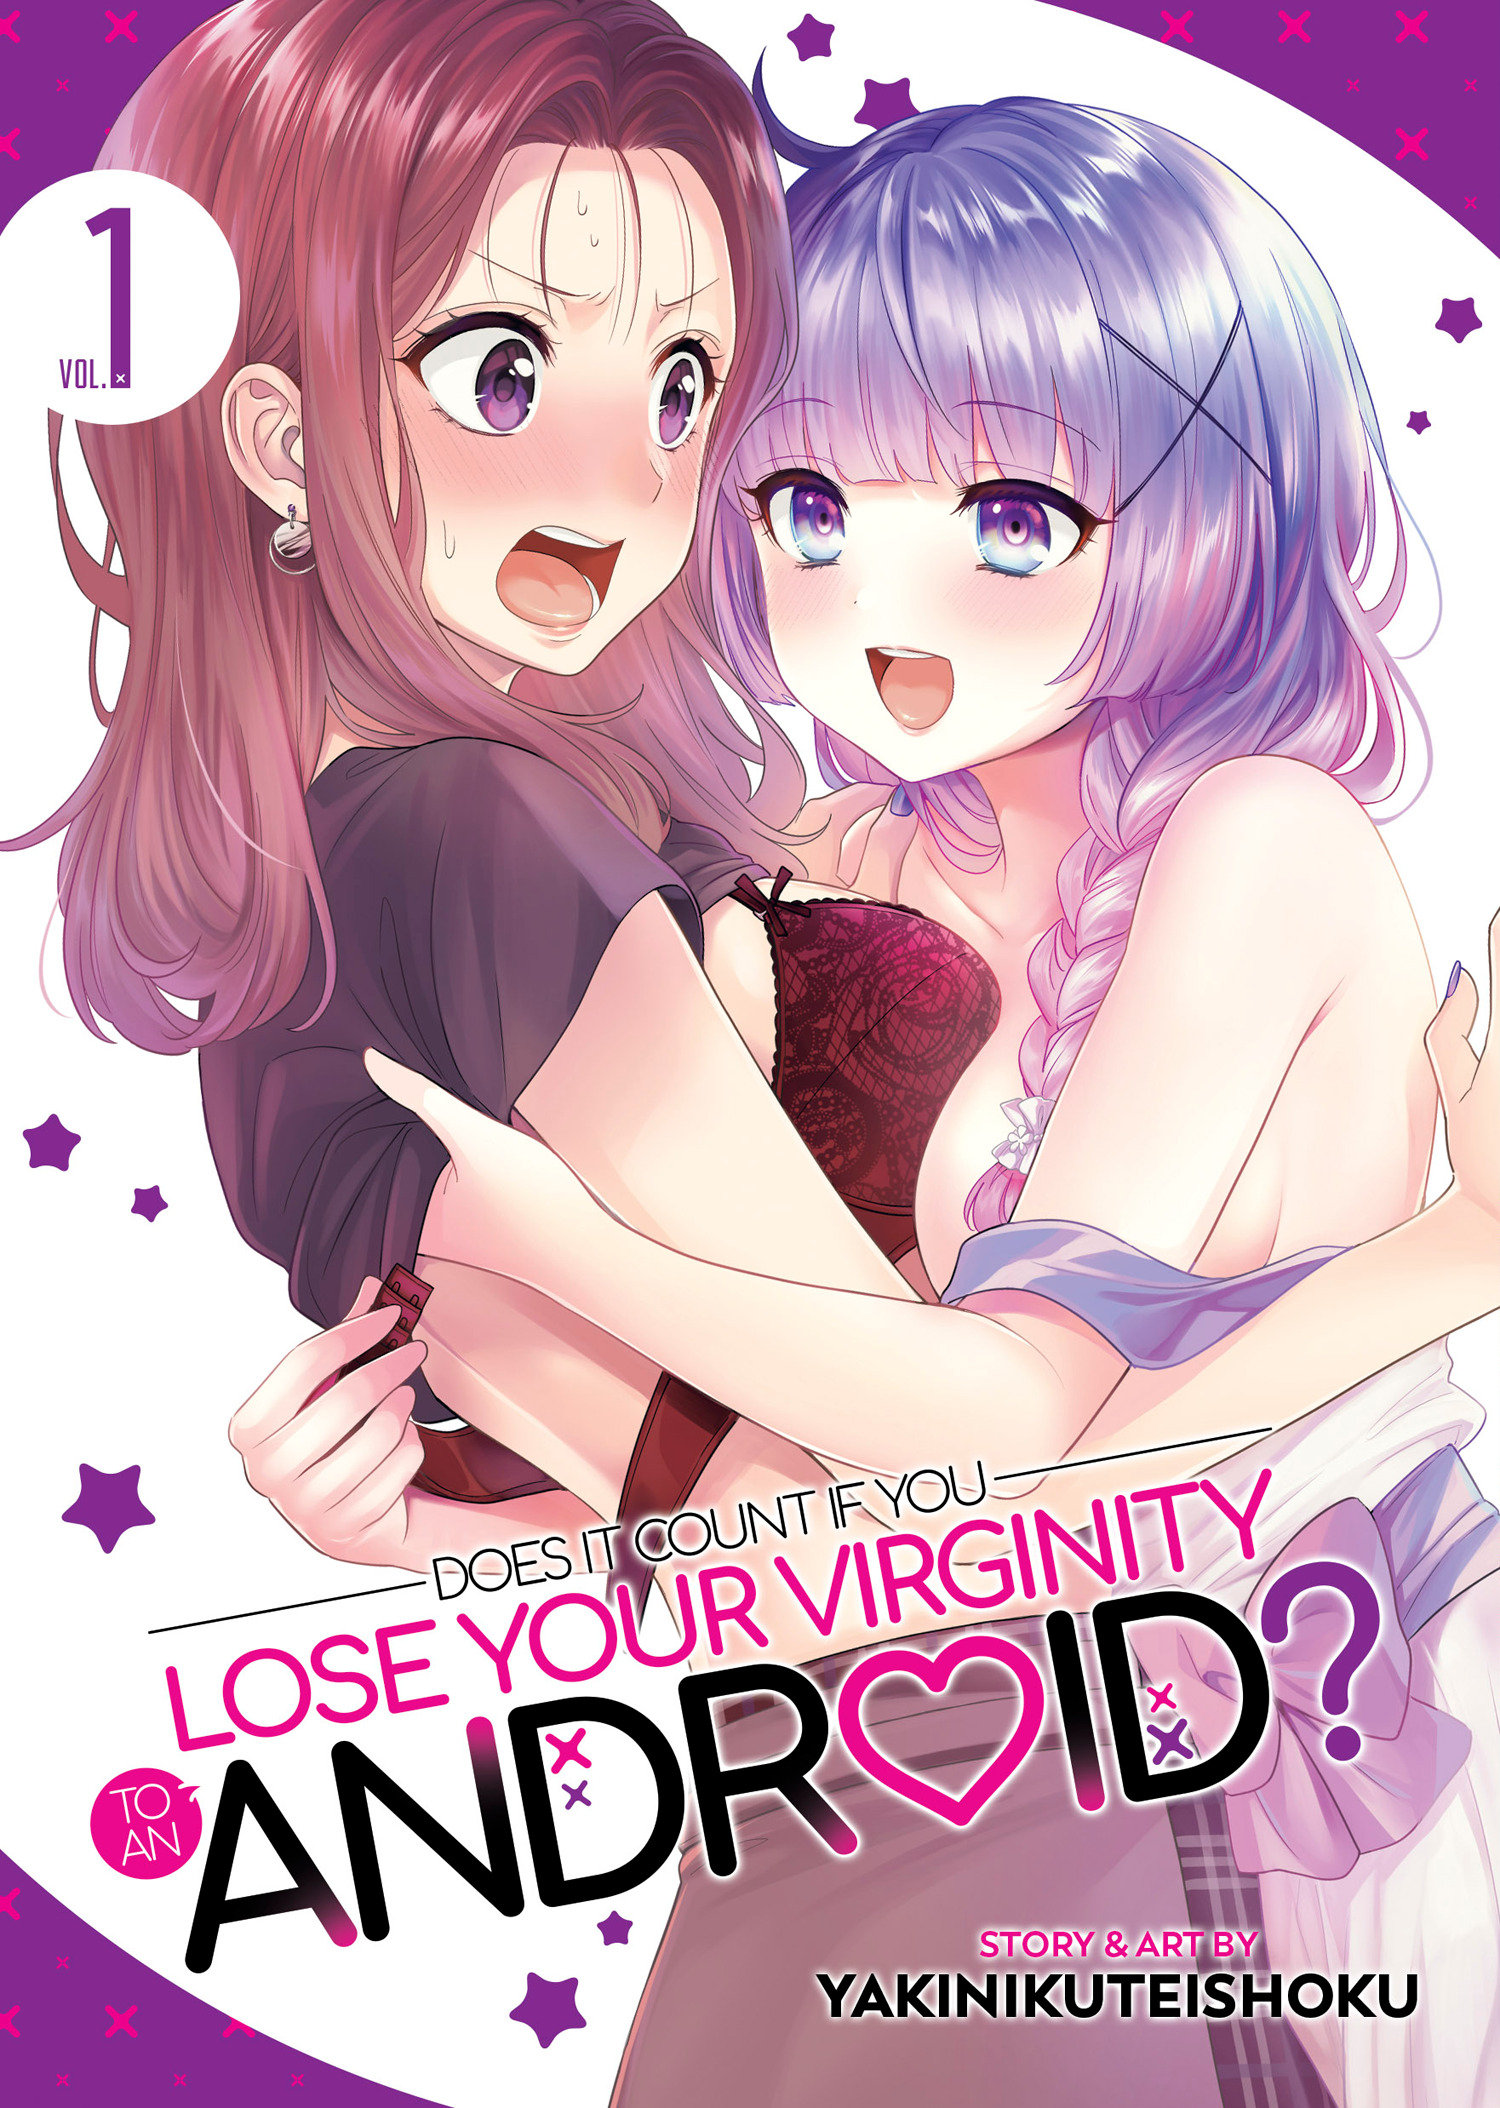 Does it Count if Lose Virginity to an Android? Manga Volume 1